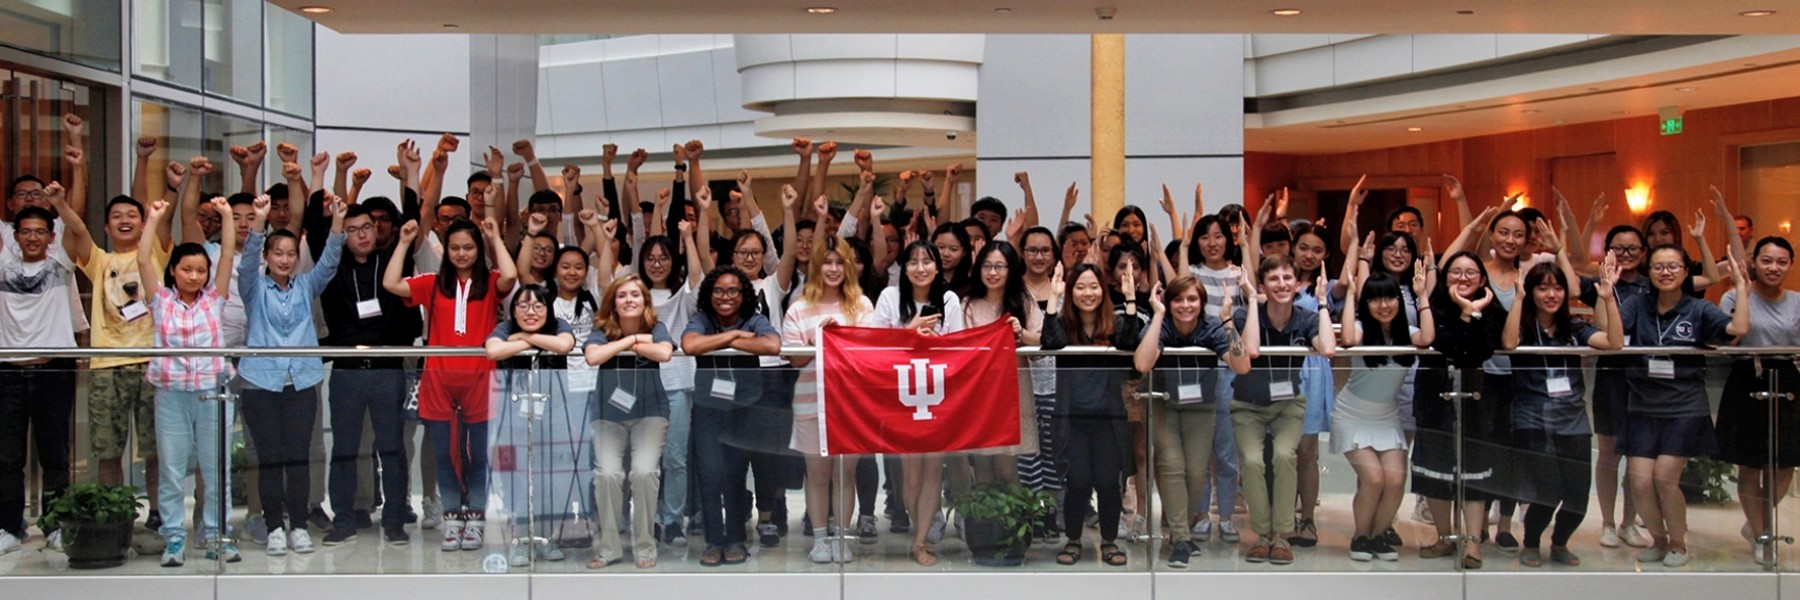 A large group photo of iu2u students in front of an IU flag